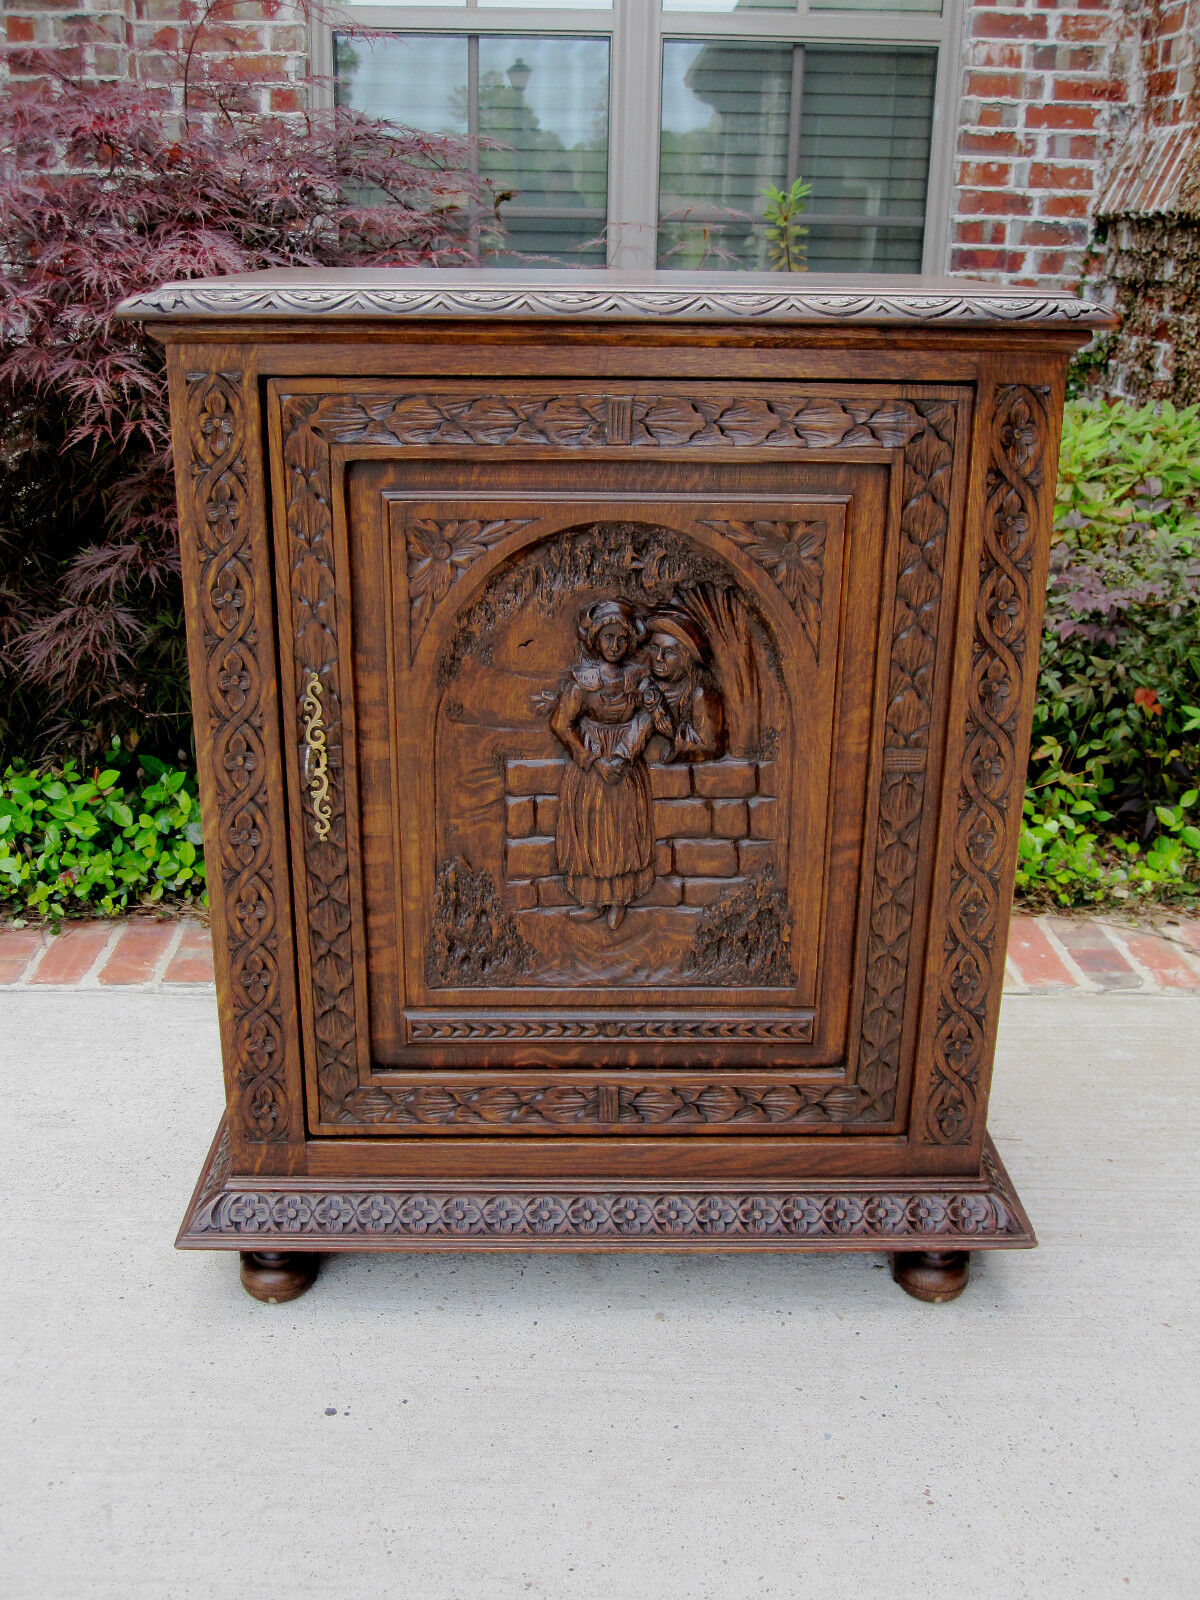 Antique French Carved Brittany Jam Cupboard Wine Liqour Bar Chest***ON SALE***